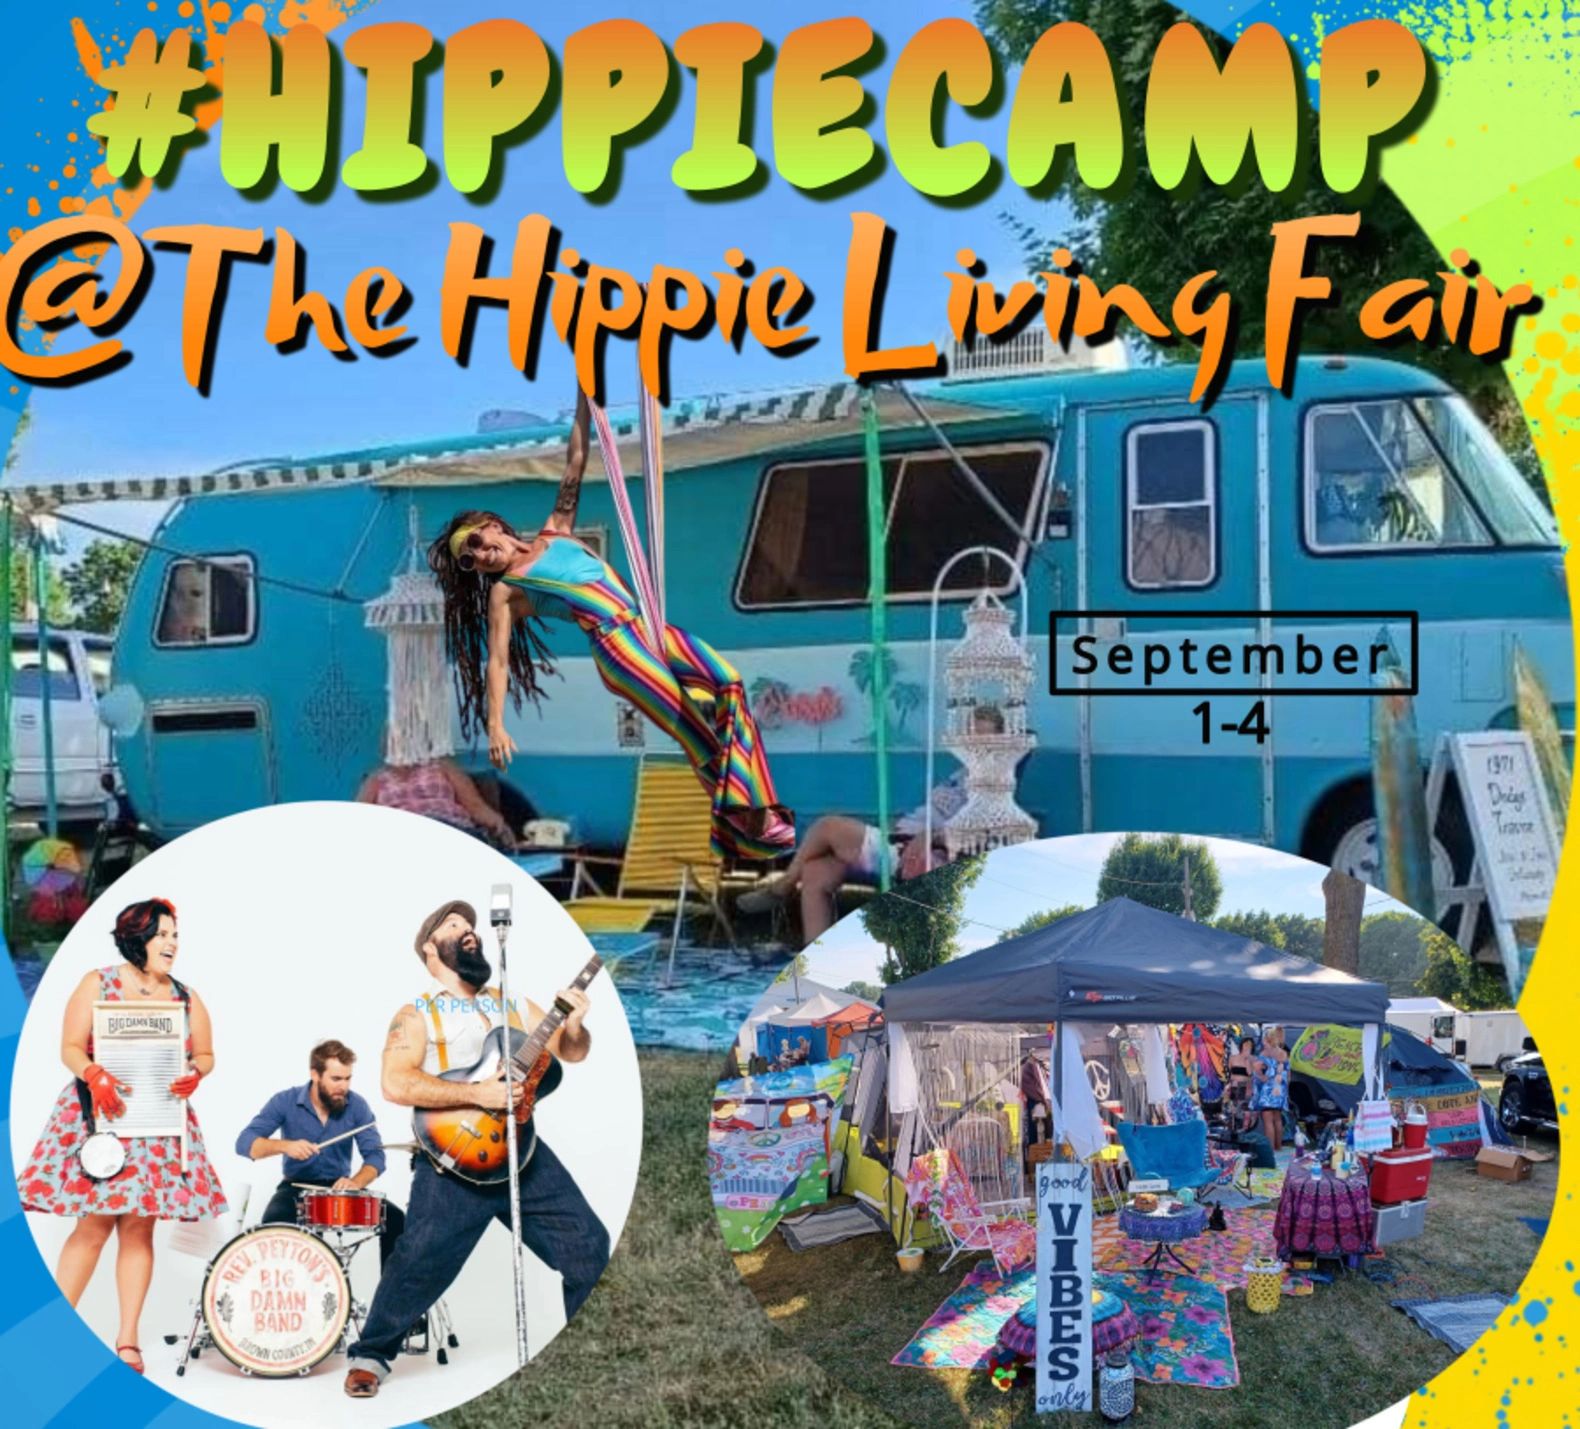 Hippie Living Fair is an Absolute Blast and is Coming to Michigan